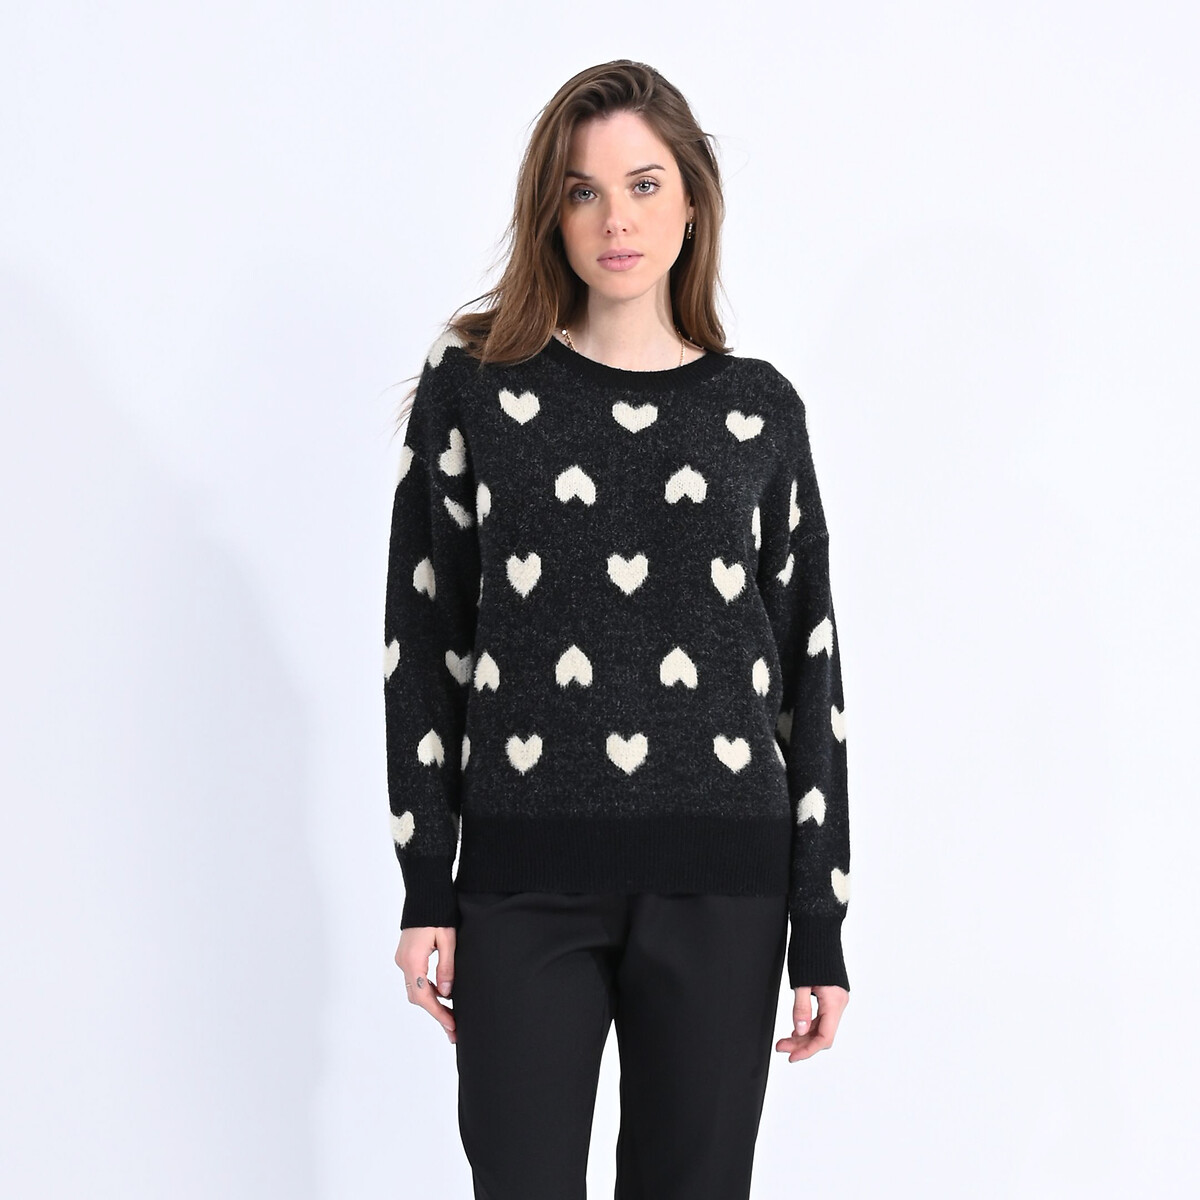 heart pattern jumper with crew neck